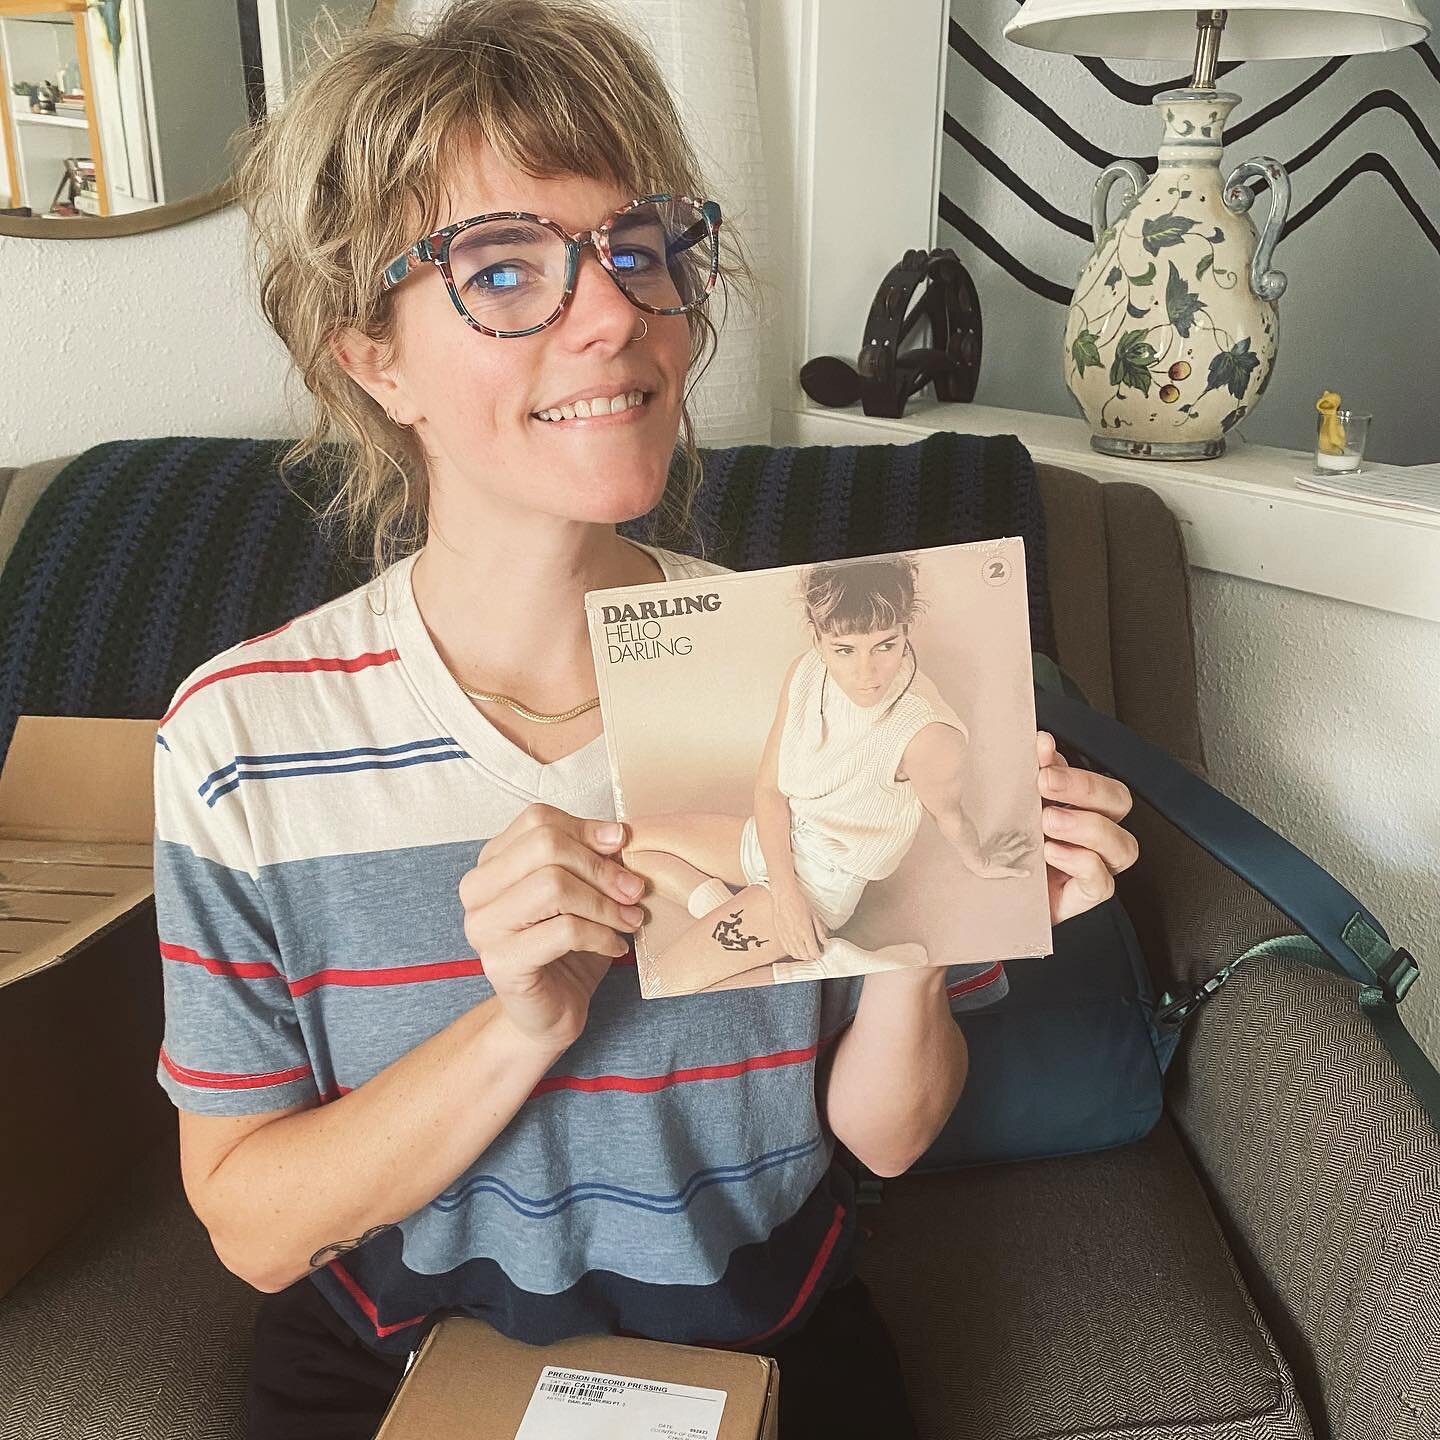 Least Of It drops on October 24th and guess what? 
Vinyl has arrived! All four singles from Hello Darling are now available on classic 45s ❤️ I&rsquo;ll be sending these out to those of you who pre-ordered and they&rsquo;re now available for immediat